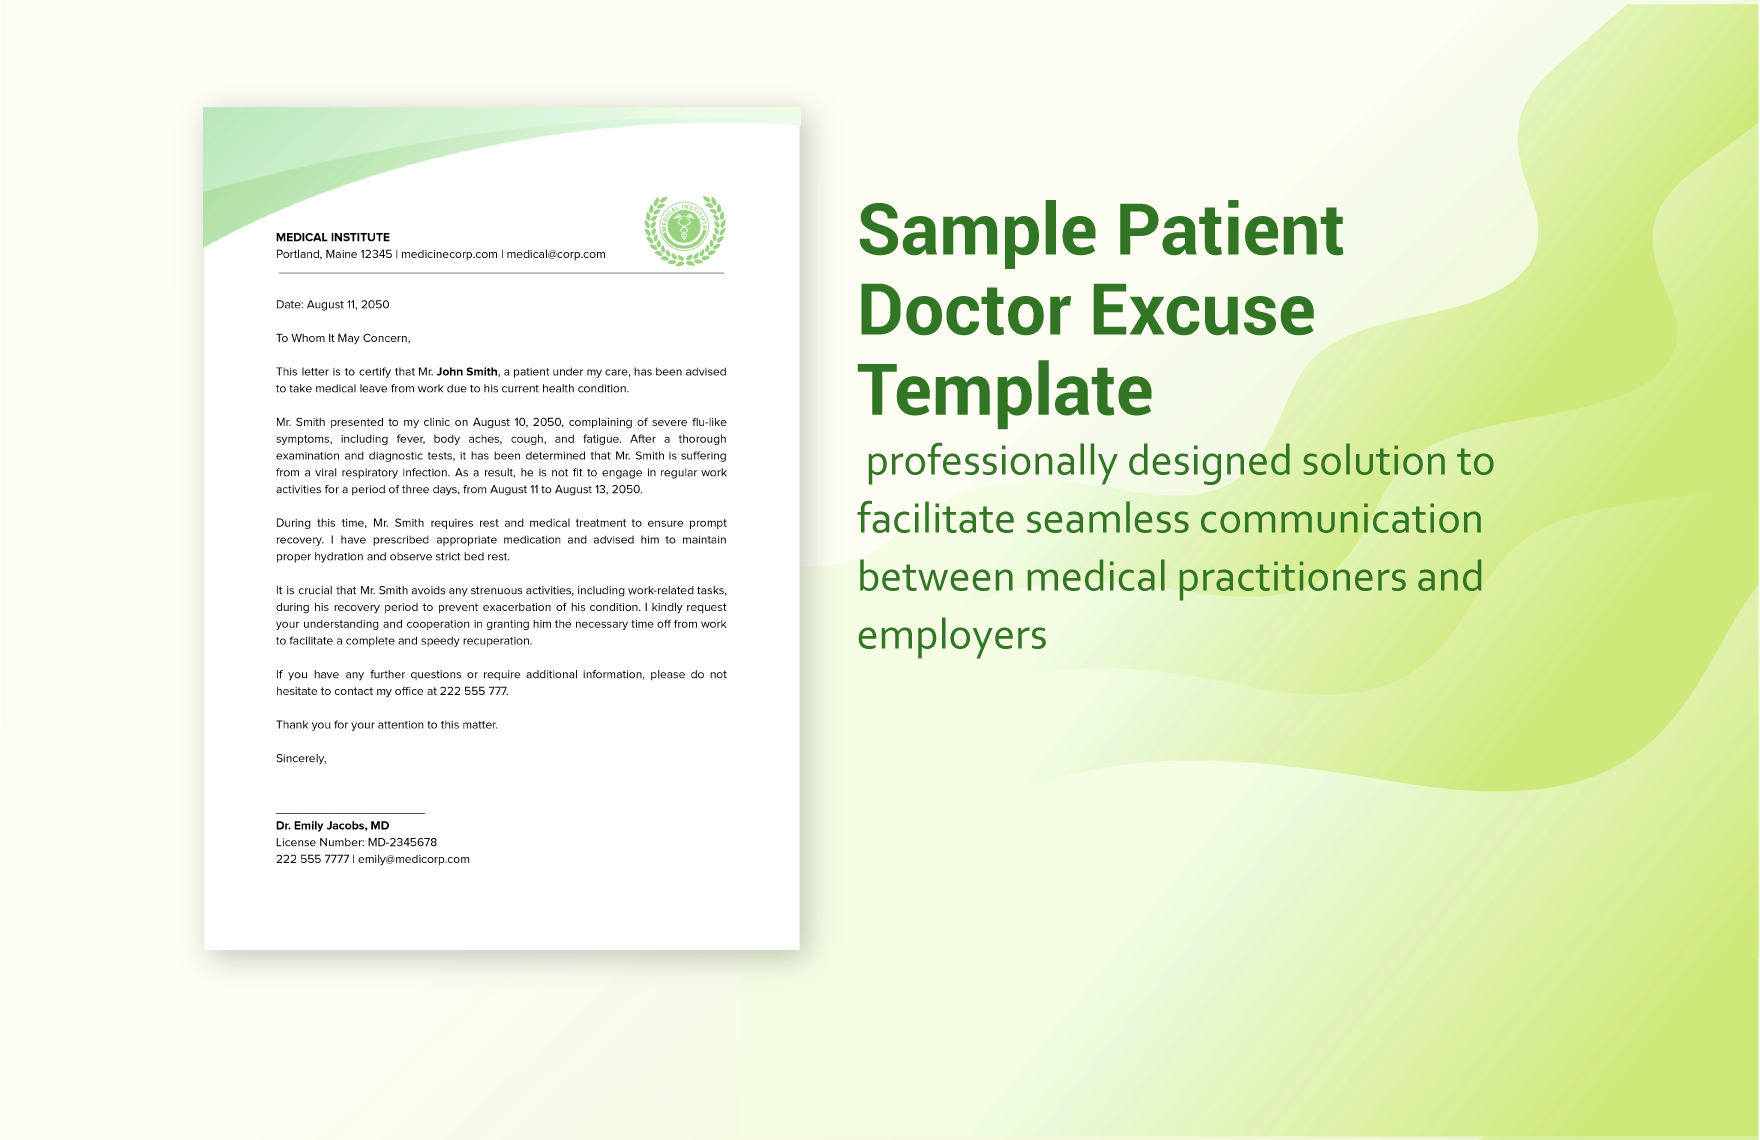 Sample Patient Doctor Excuse Template